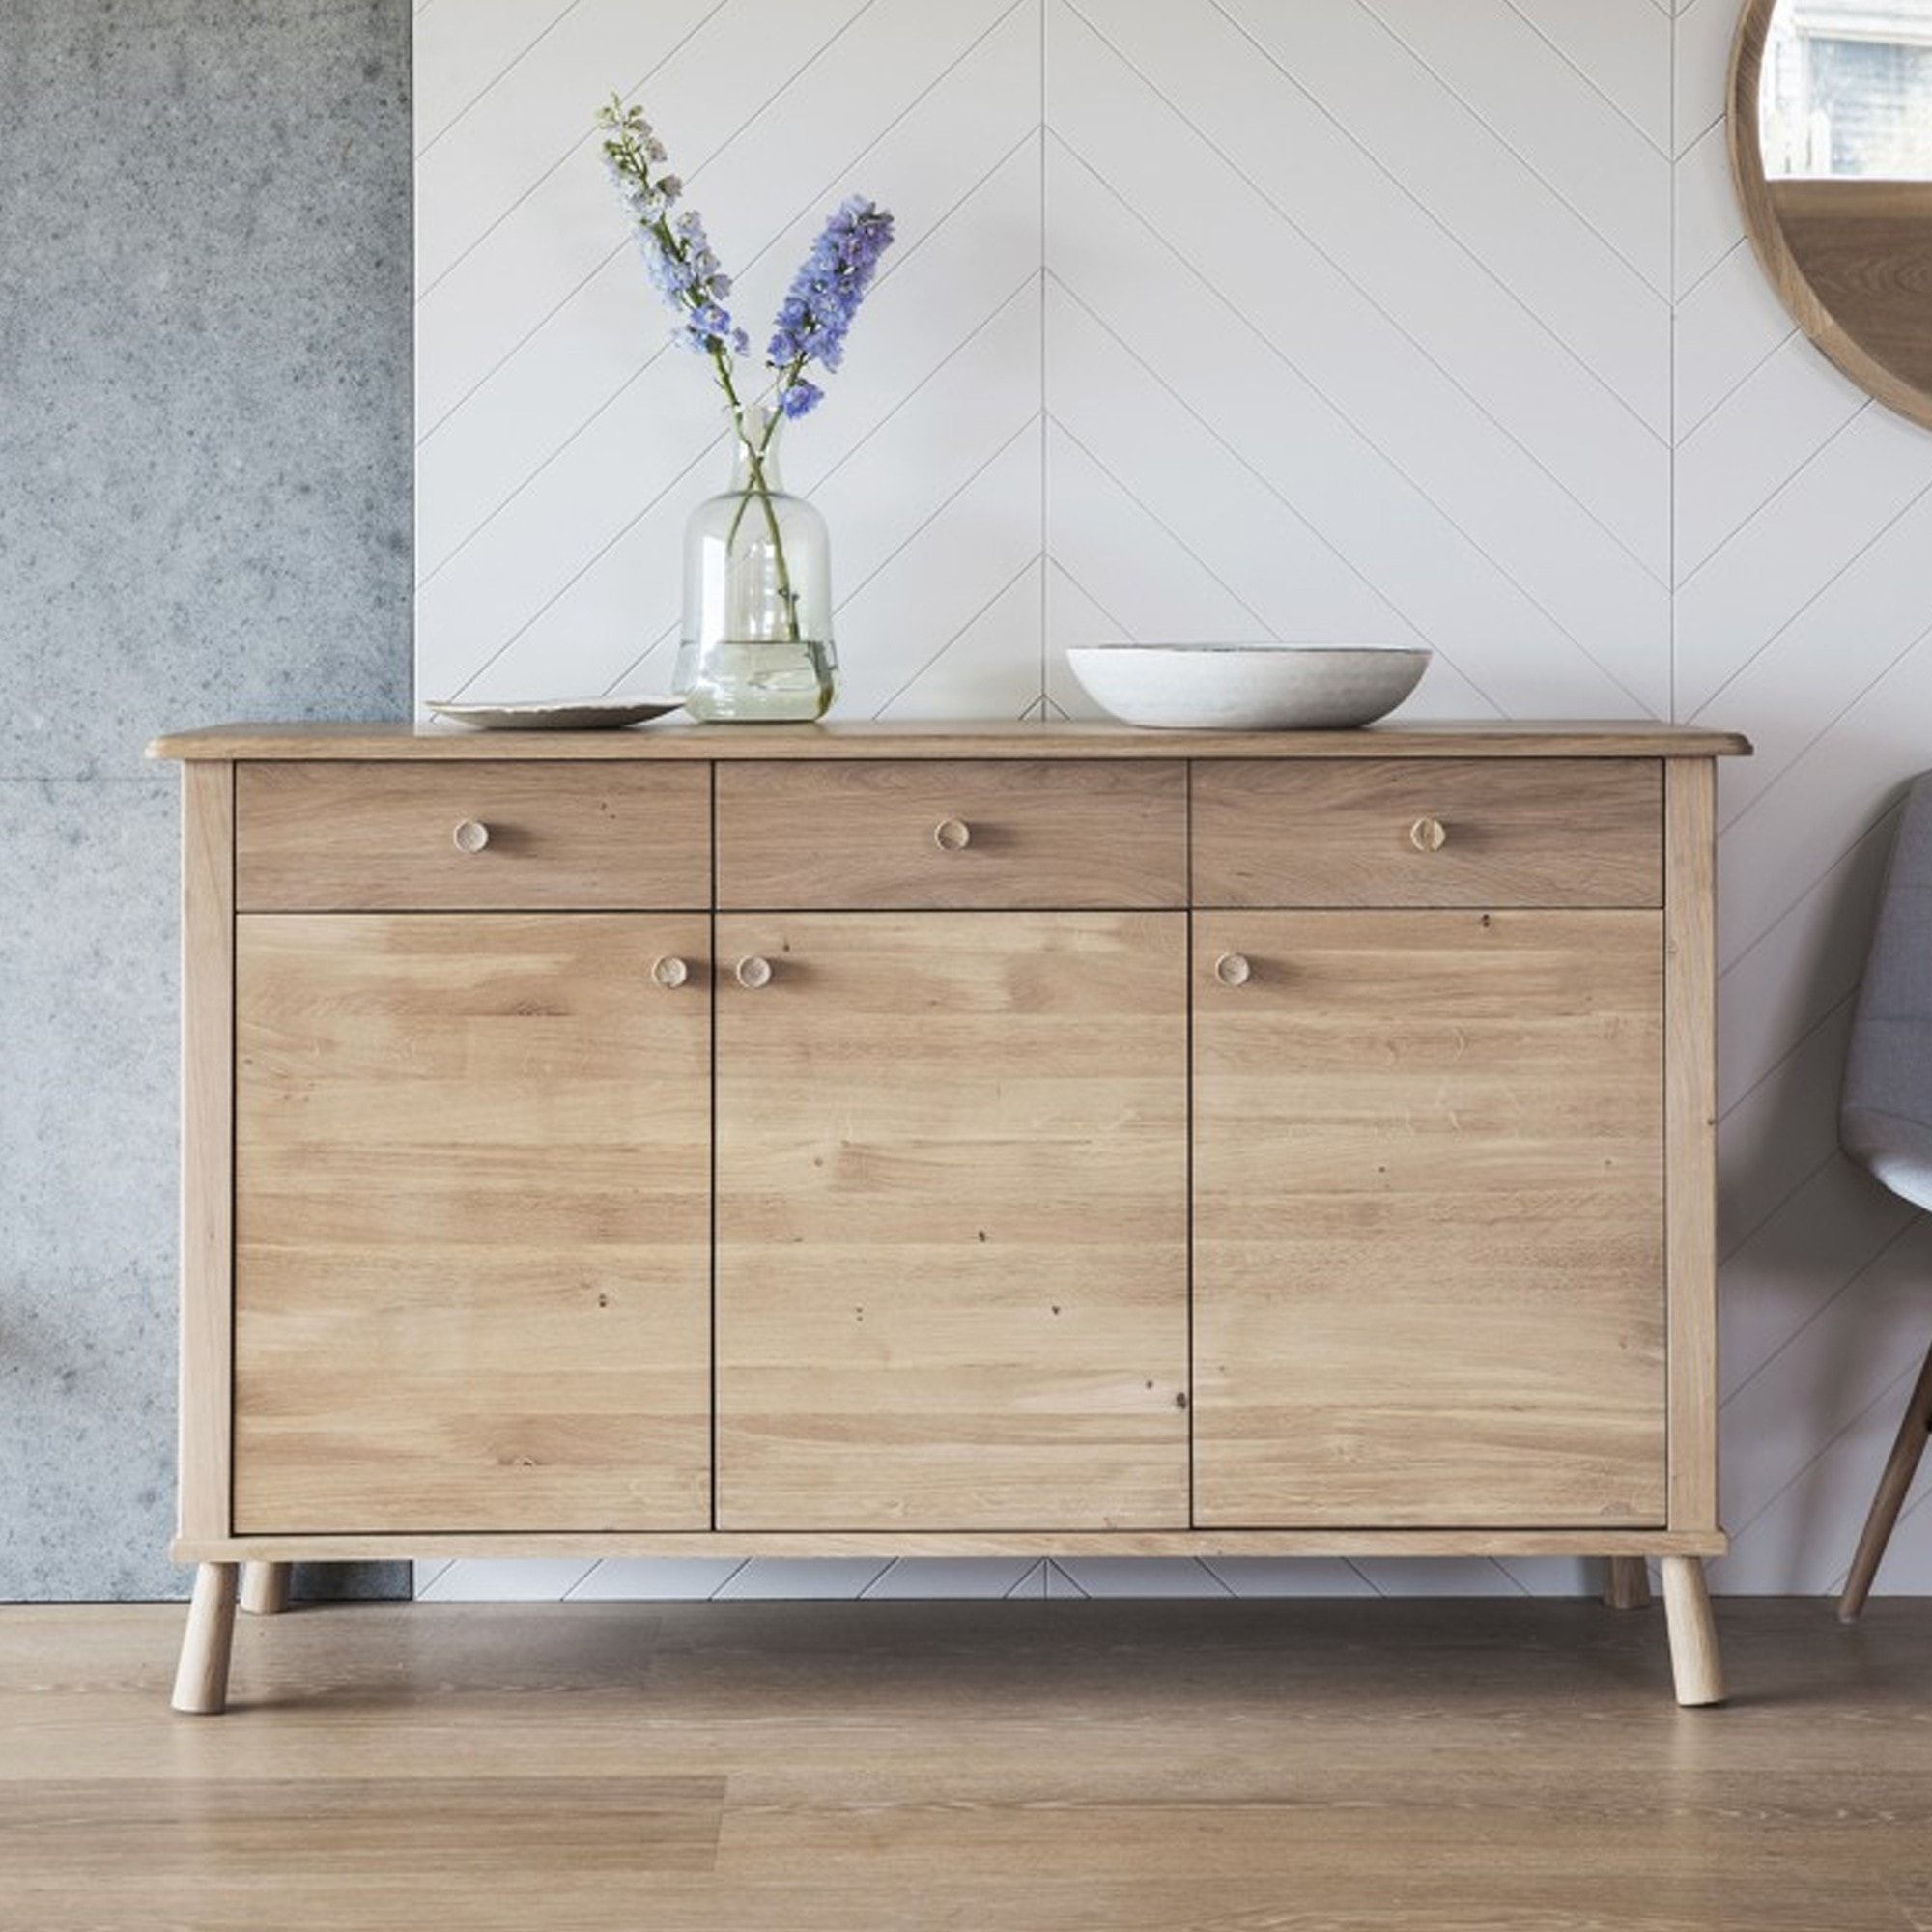 Wycombe 3 Door 3 Drawer Sideboard | Wooden Sideboards With Storage Intended For Most Recently Released 3 Door Sideboards (View 15 of 15)